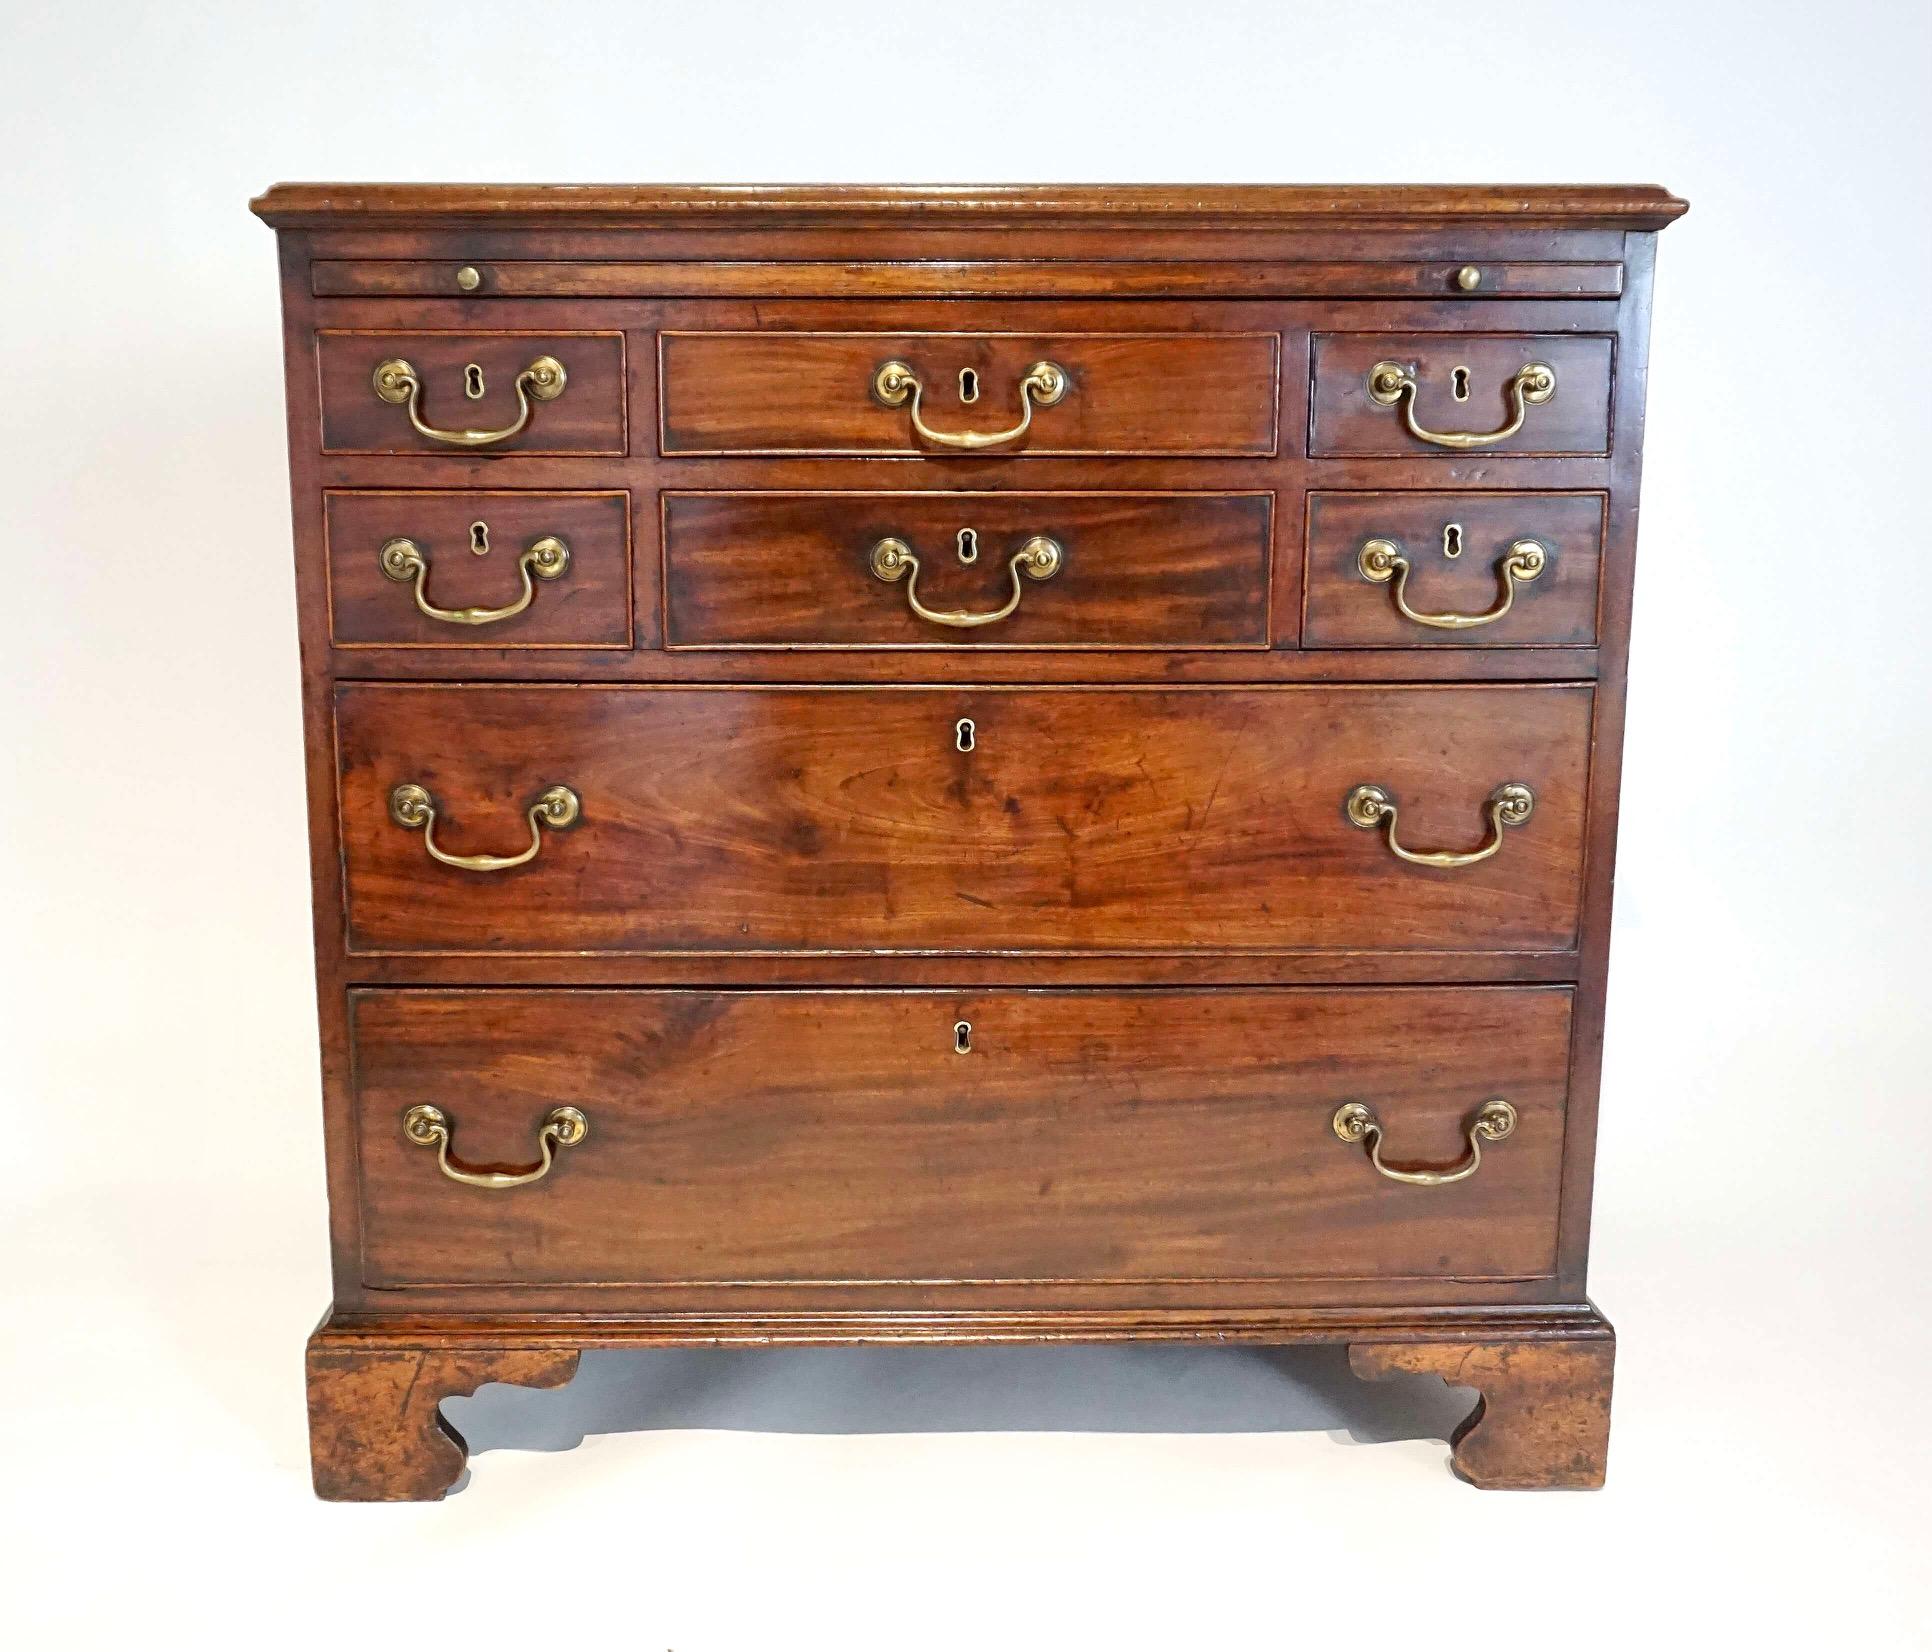 An extremely fine and elegant English late George II, early George III period chest of unusual form having mahogany case with brushing slide above six upper drawers over two lower all with original brass hardware. A truly exceptional piece with